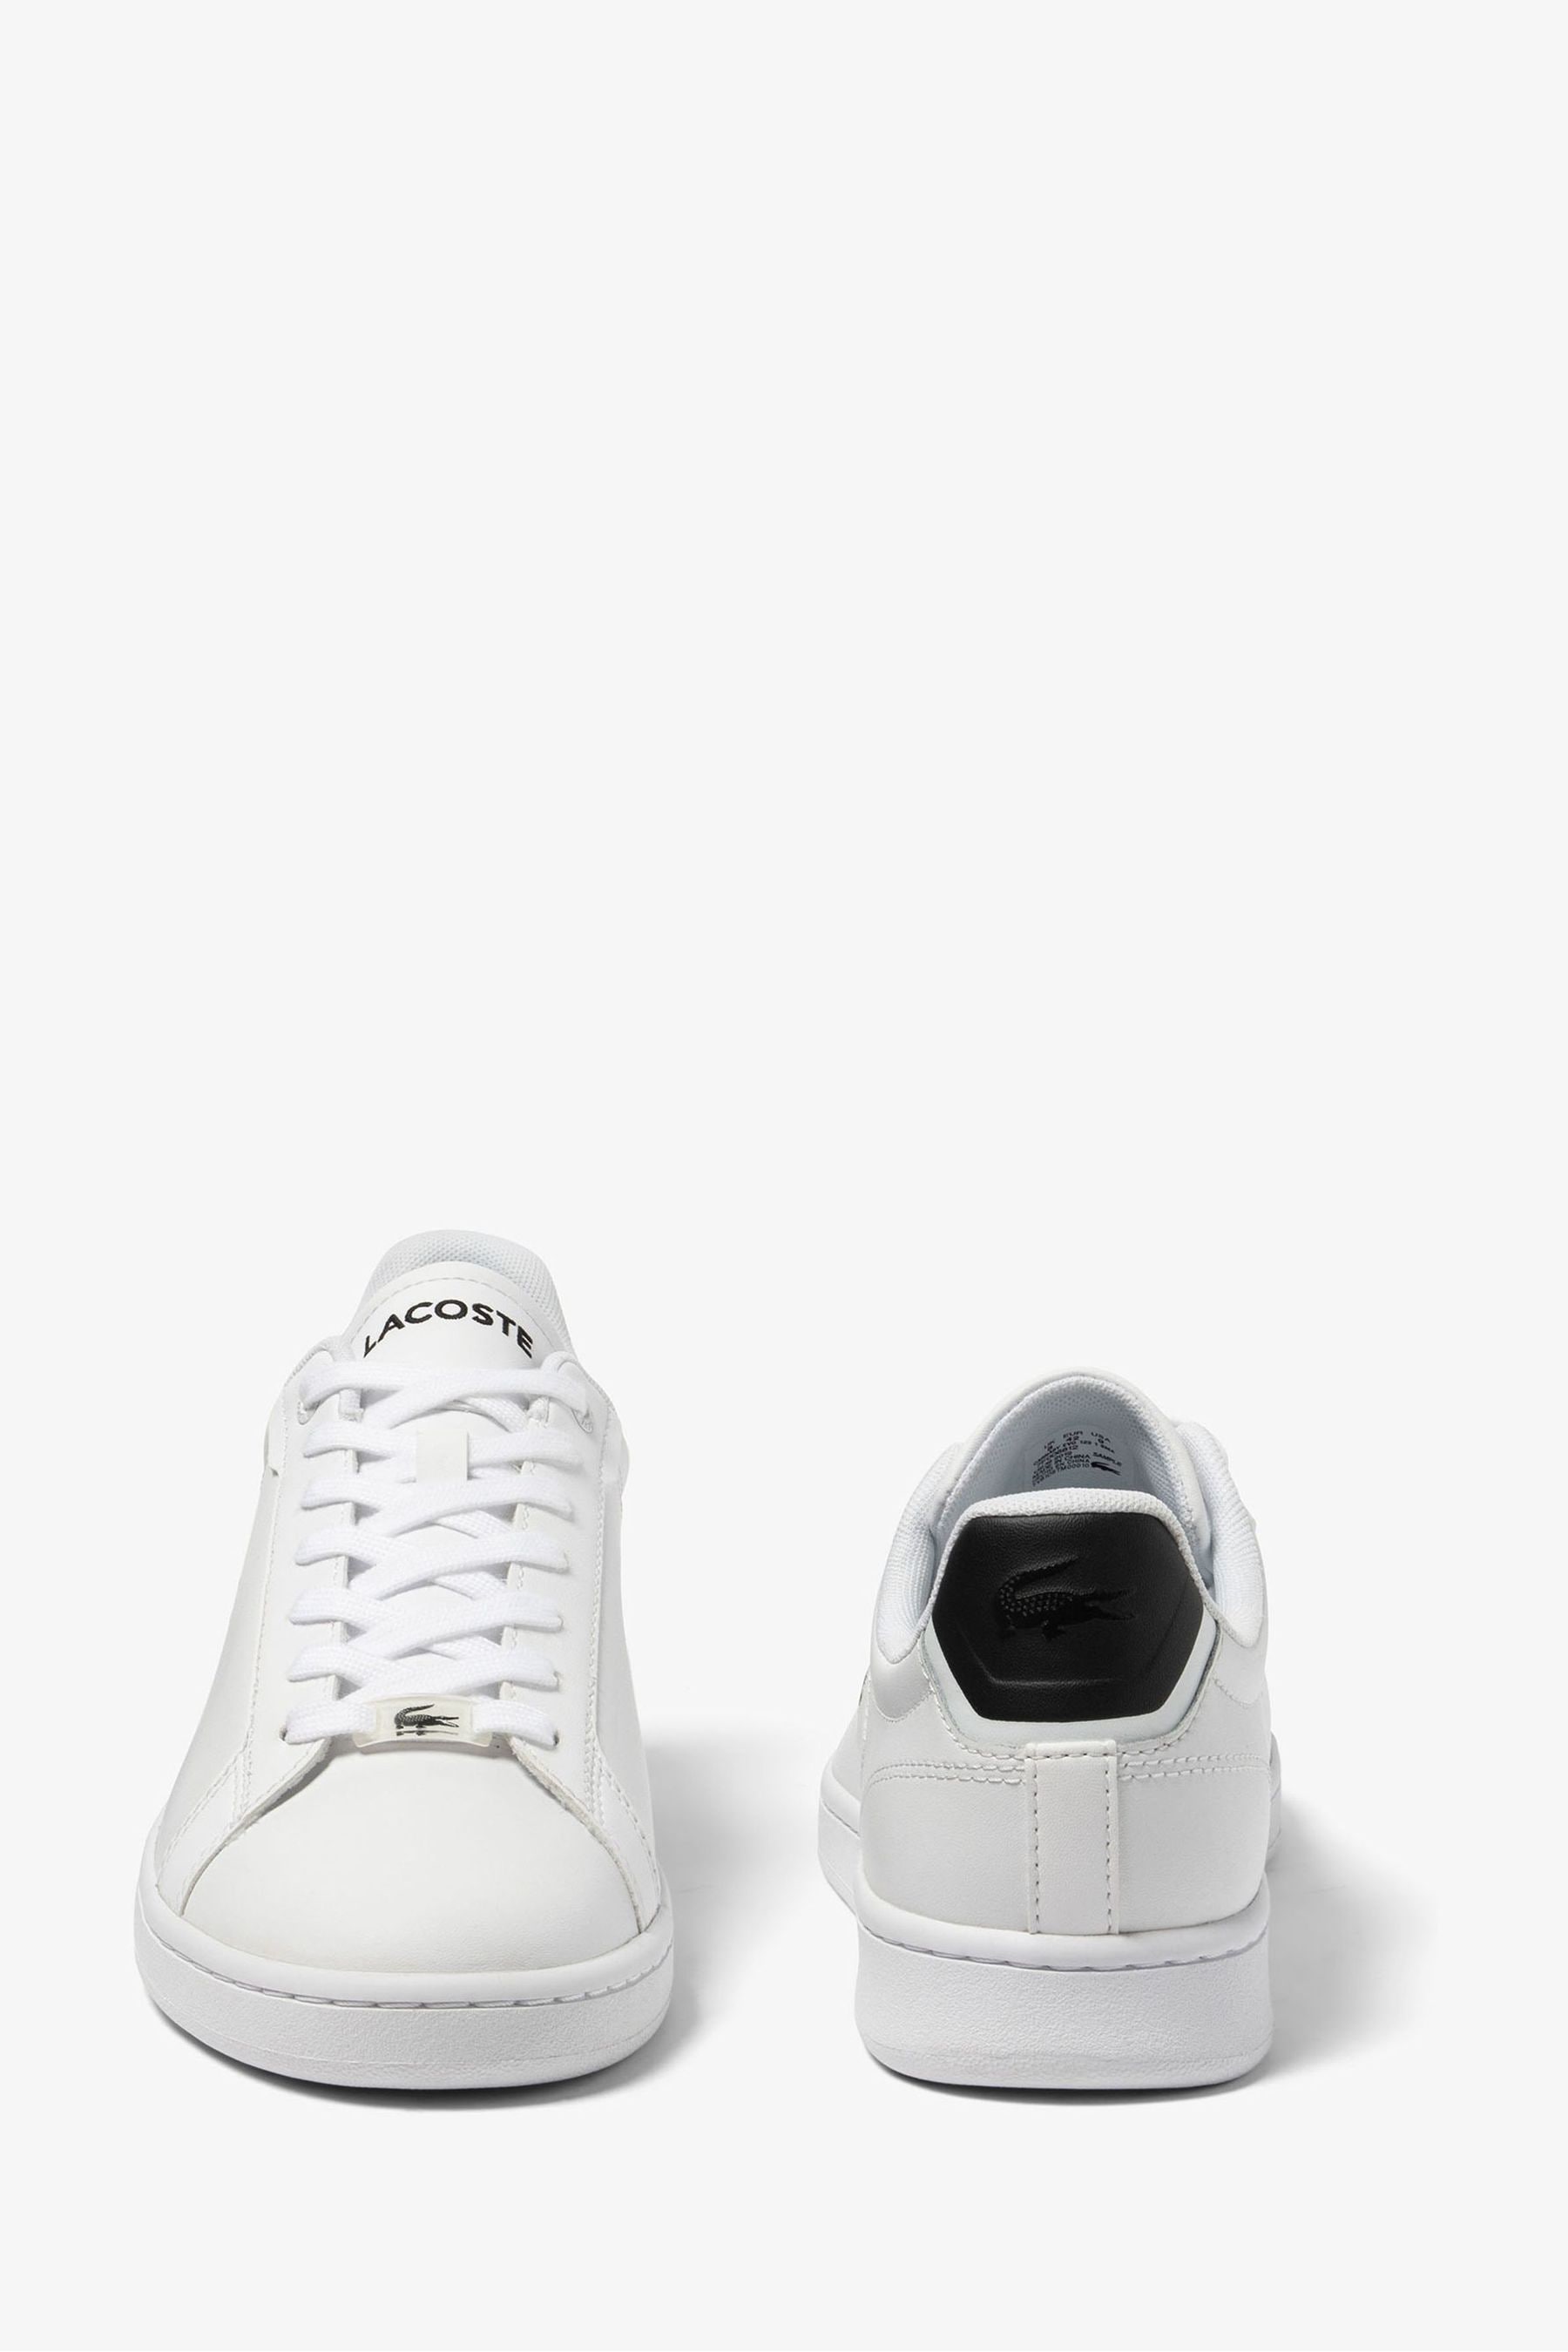 Buy Lacoste Mens Carnaby Pro White Trainers from the Next UK online shop